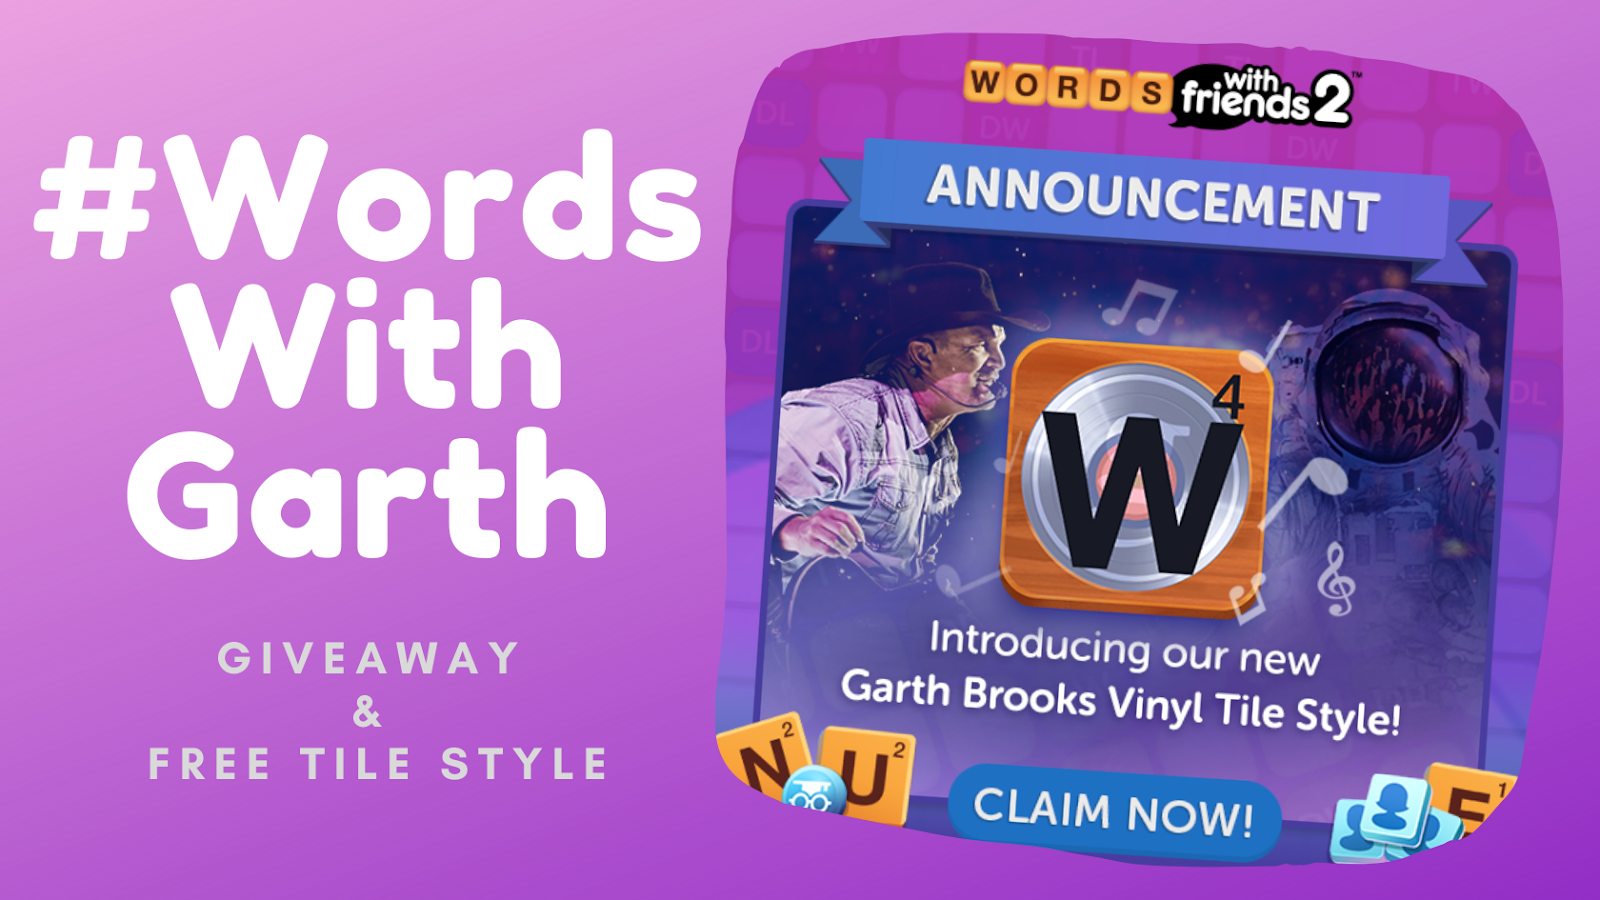 Text: Hashtag Words With Garth, Giveaway &amp; Free Tile Style. Image: Garth Brooks singing with guitar, WWF tile with vinyl, astronaut, Text on image: Words With Friends 2 Announcement, Introducing our new Garth Brooks Vinyl Tile Style! Claim Now! 